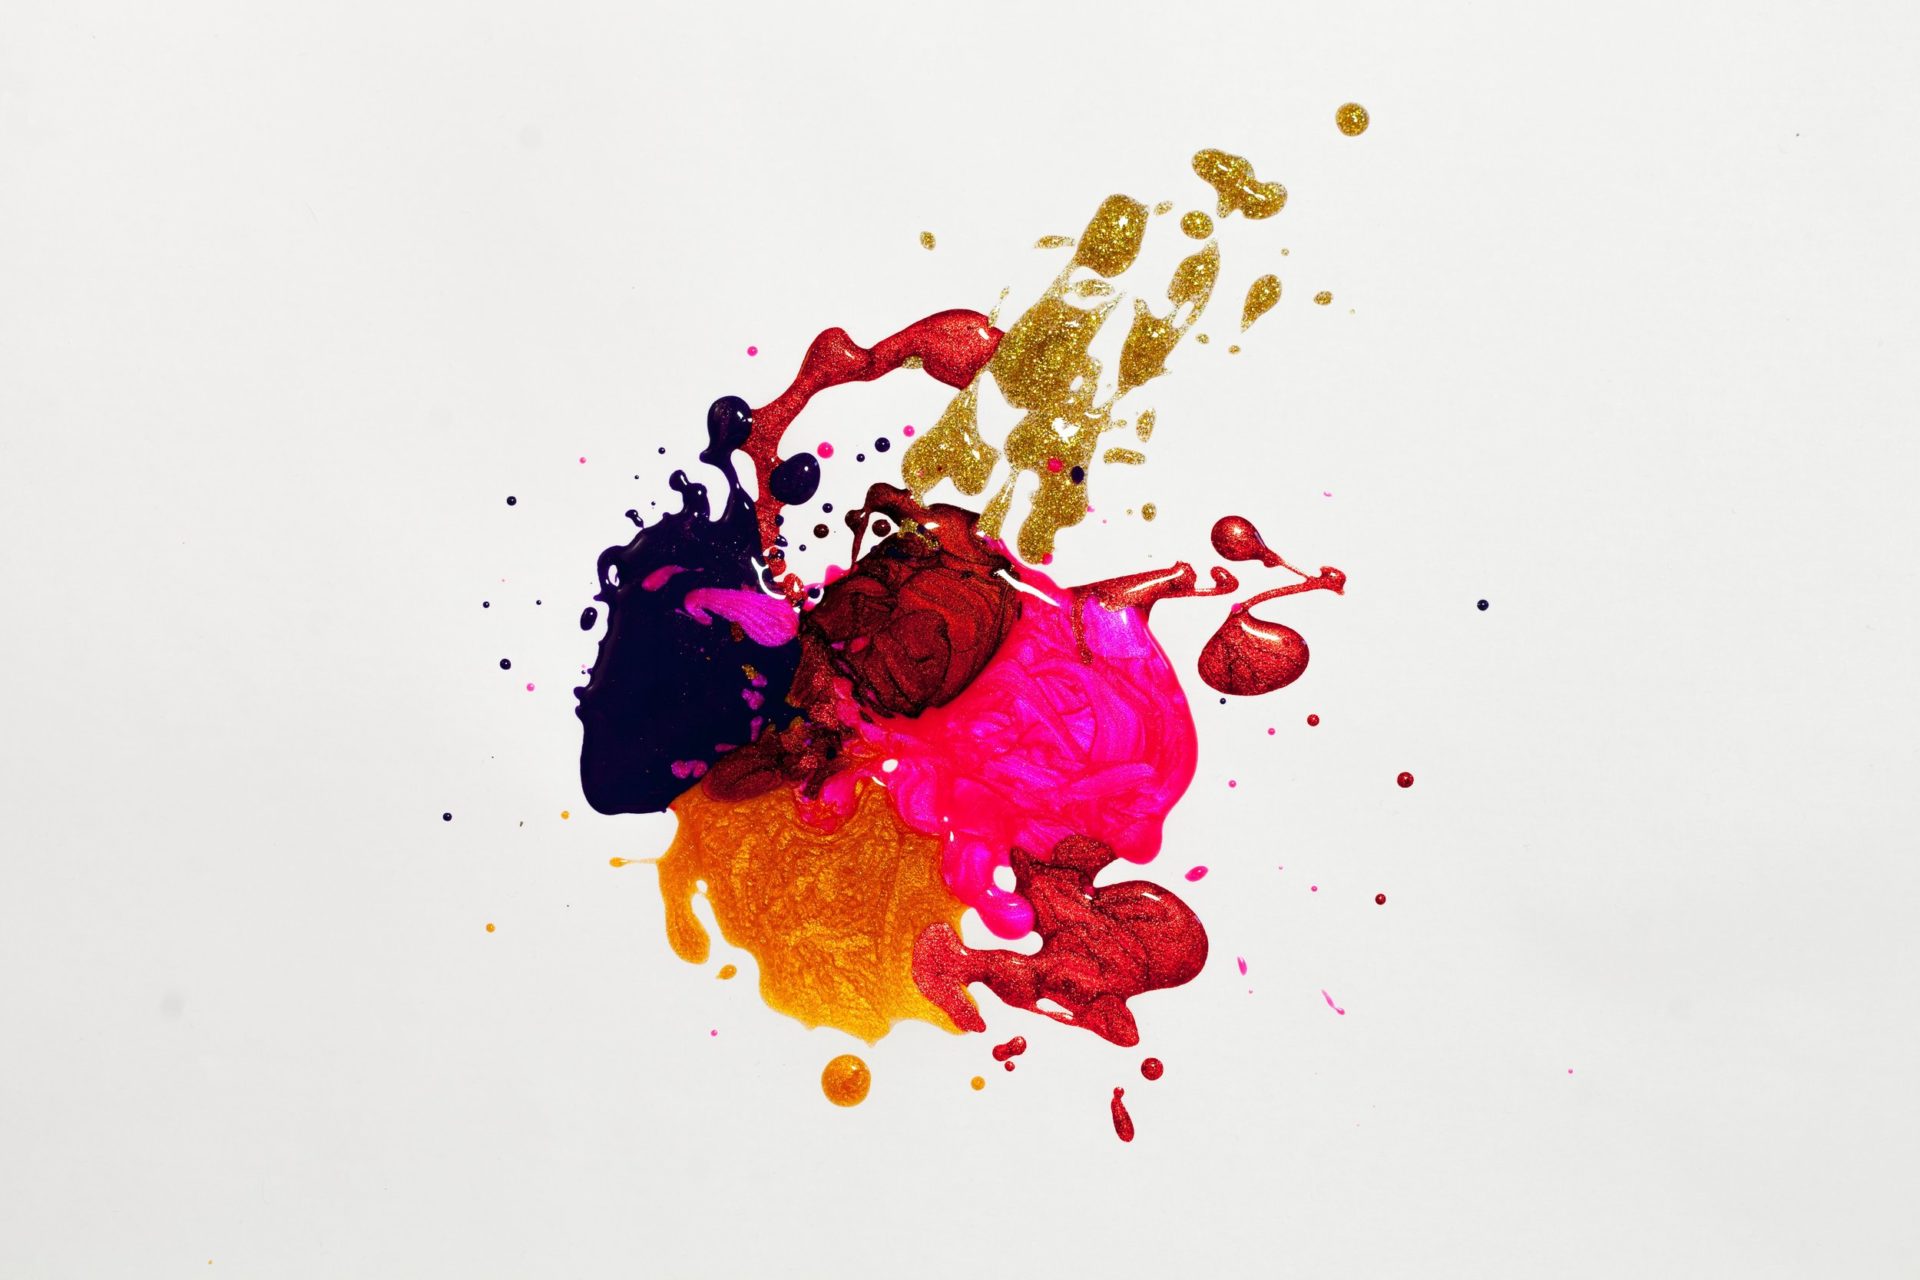 Paint Splatter Art the Easy Way: Techniques for Your Next Project